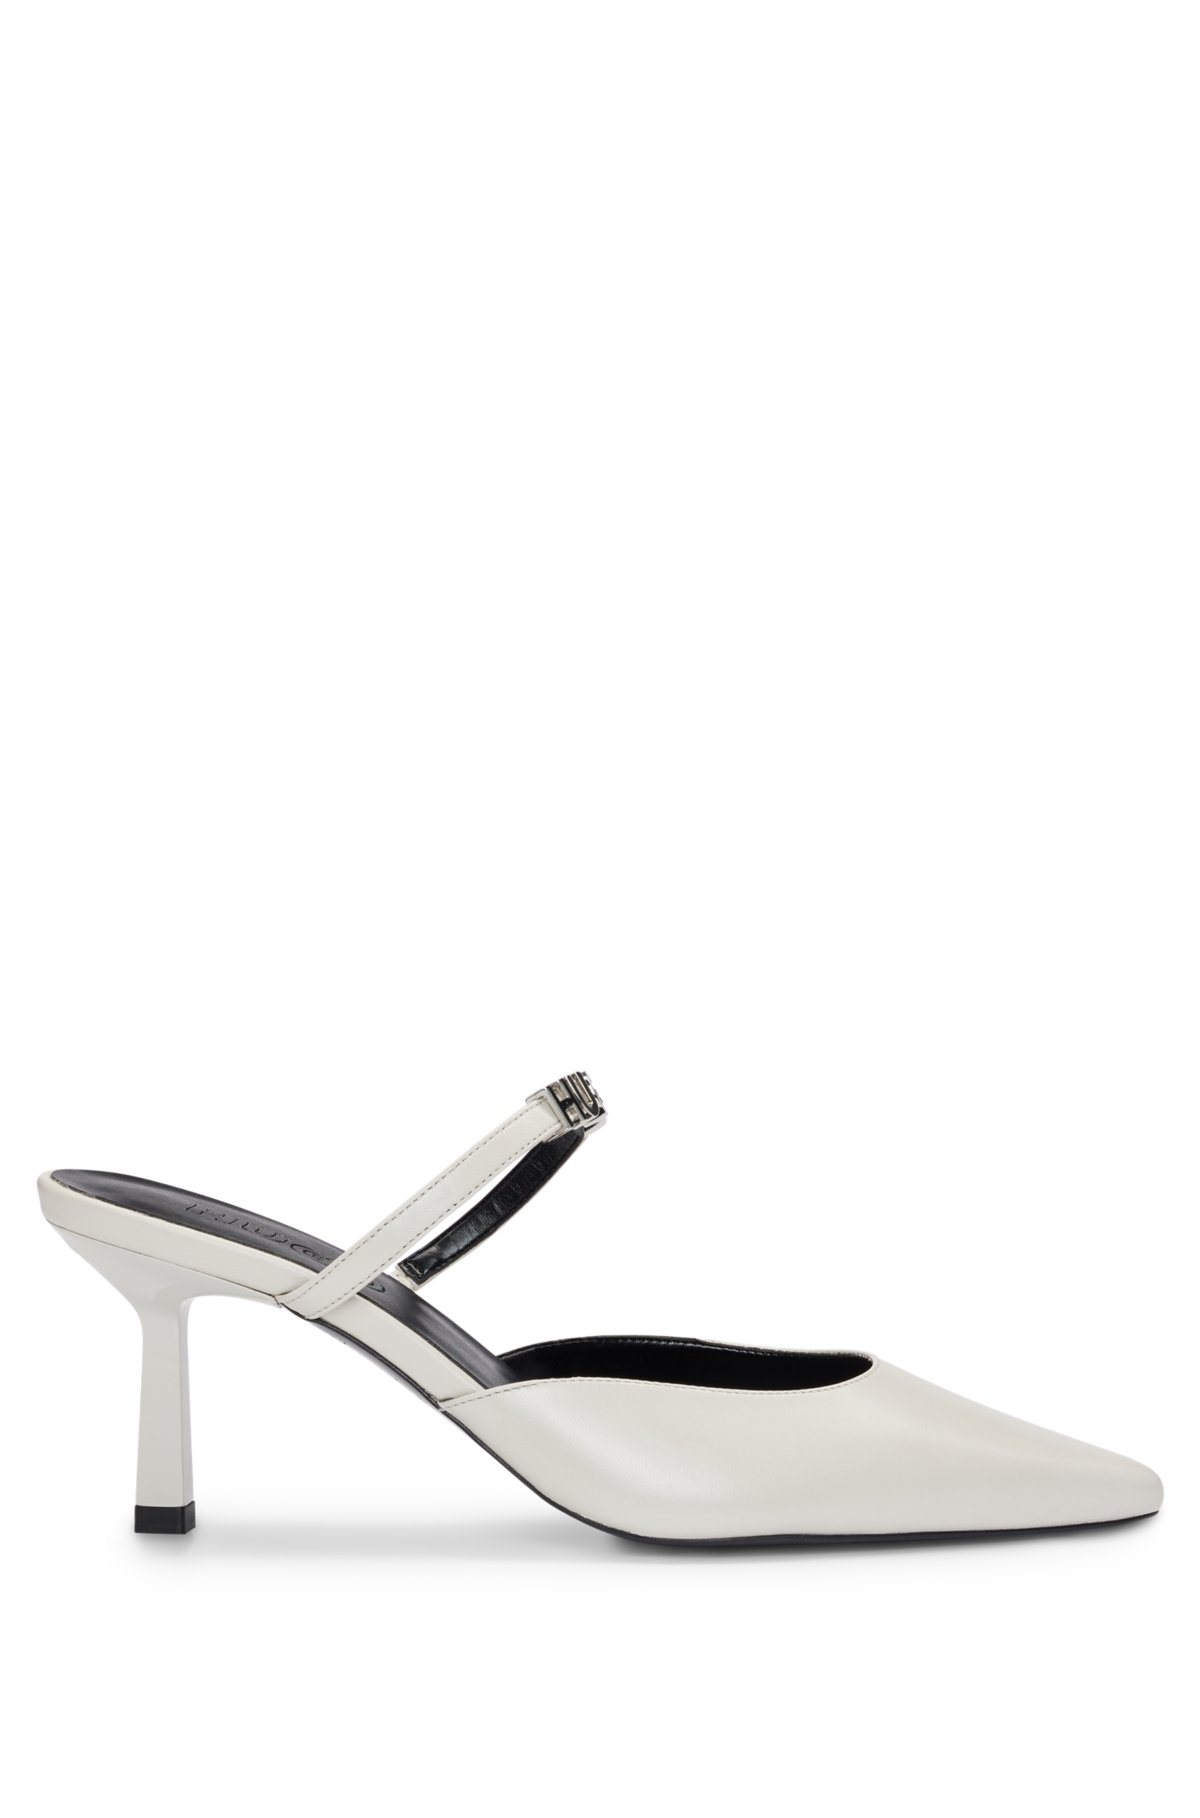 Nappa-leather buckle-closure sandals with logo trim, White